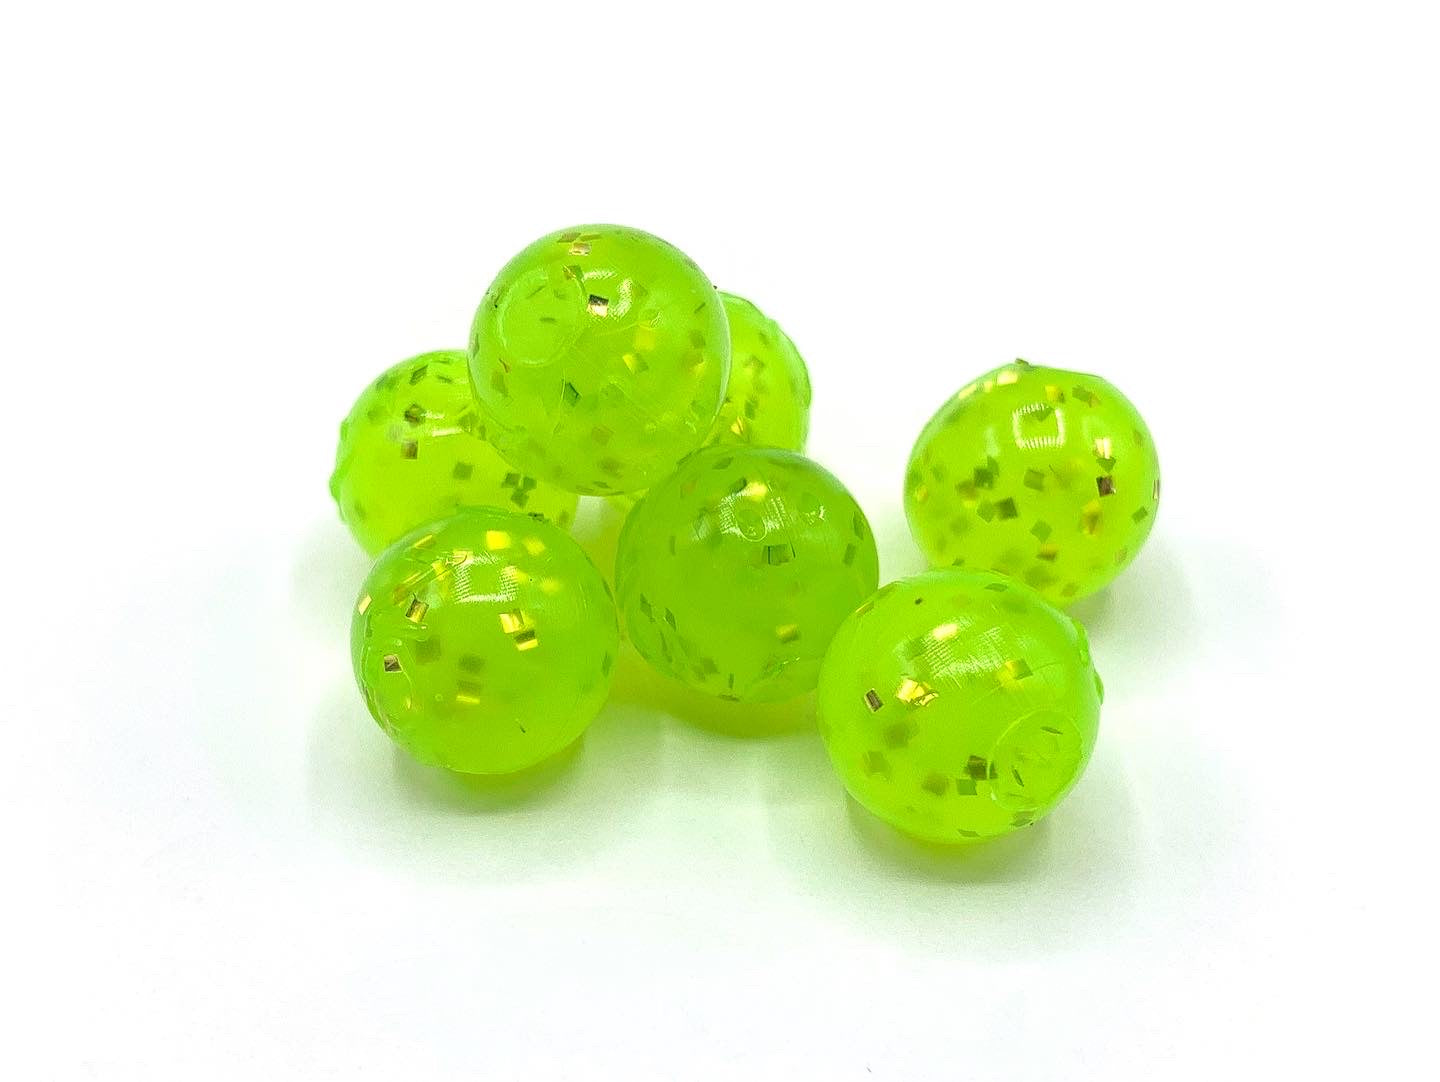 16mm 40pcs fishing beads Round Fishing Rig Beads, Soft Erbium Float  Silicone material, For All Sort Fishing Rigs Saltwater/Freshwate